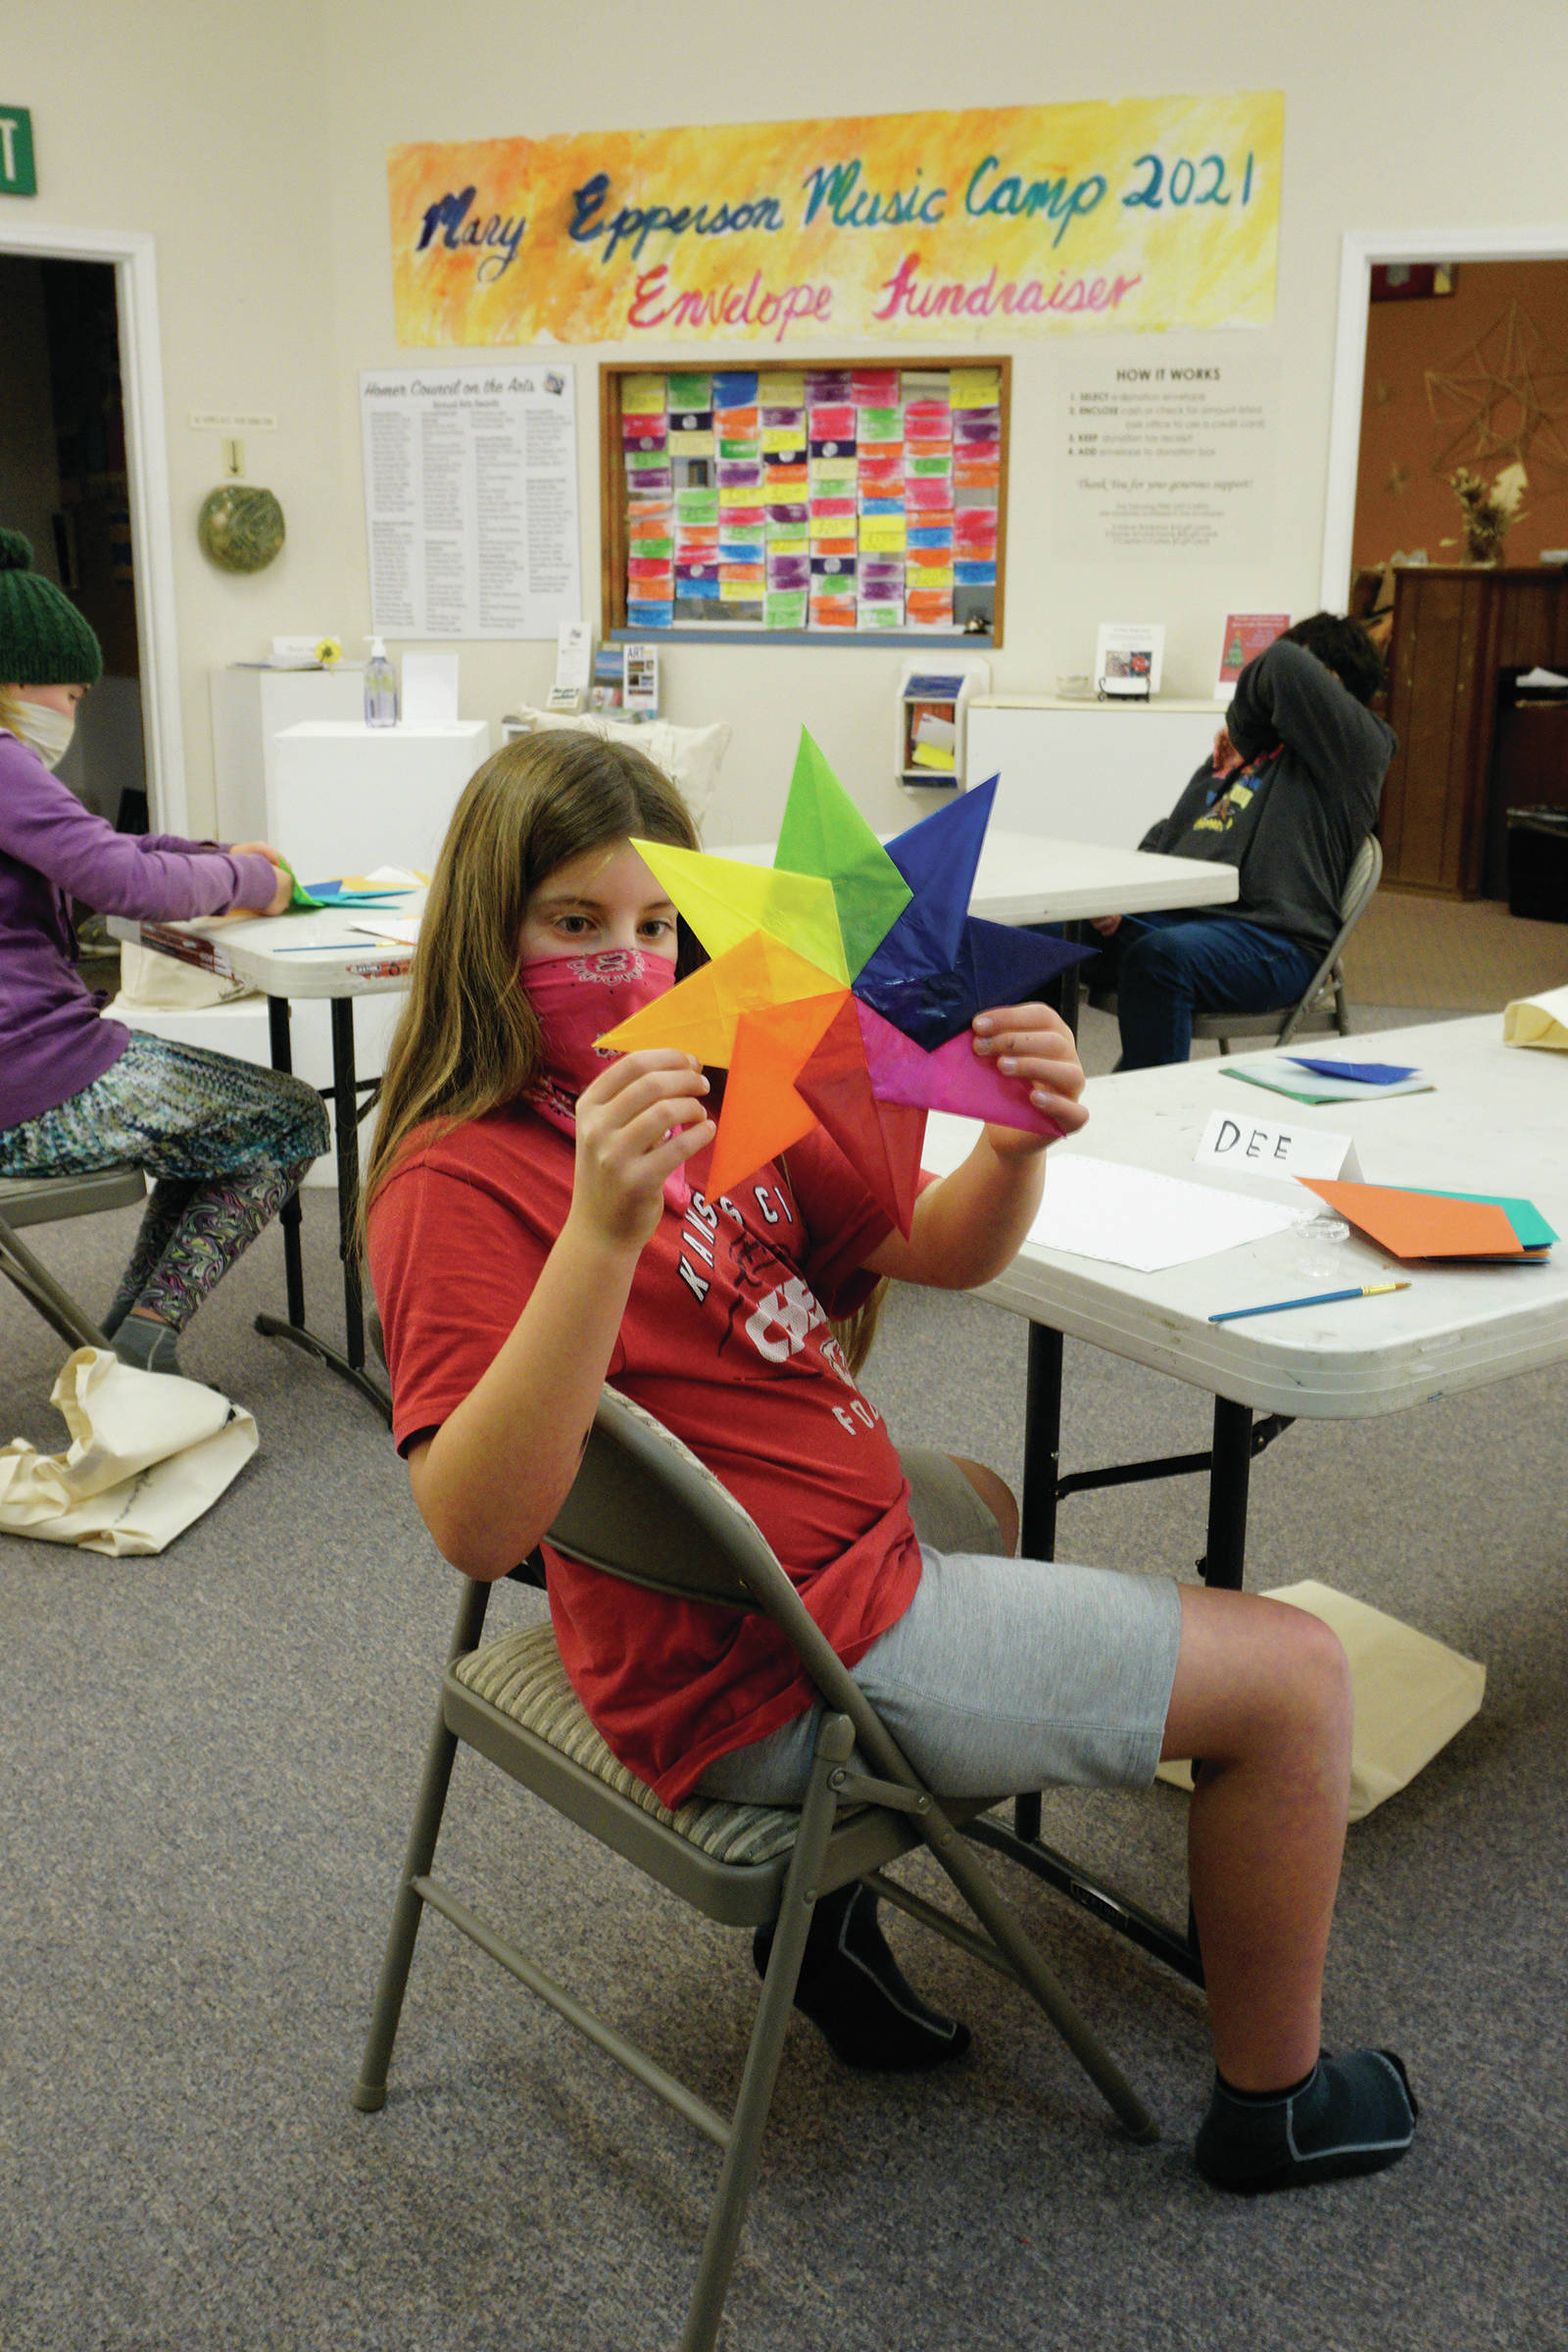 Dee Wilmeth, age 9, shows an origami star she made in Amy Komar’s socially-distant Art a la Carte class on Friday, Nov. 20, 2020, at the Homer Council on the Arts. Children in the class wore masks and worked at either end of long tables spaced apart. The stars will be placed in store windows “for a dose of color therapy for the community,” Komar said. (Photo by Michael Armstrong/Homer News)